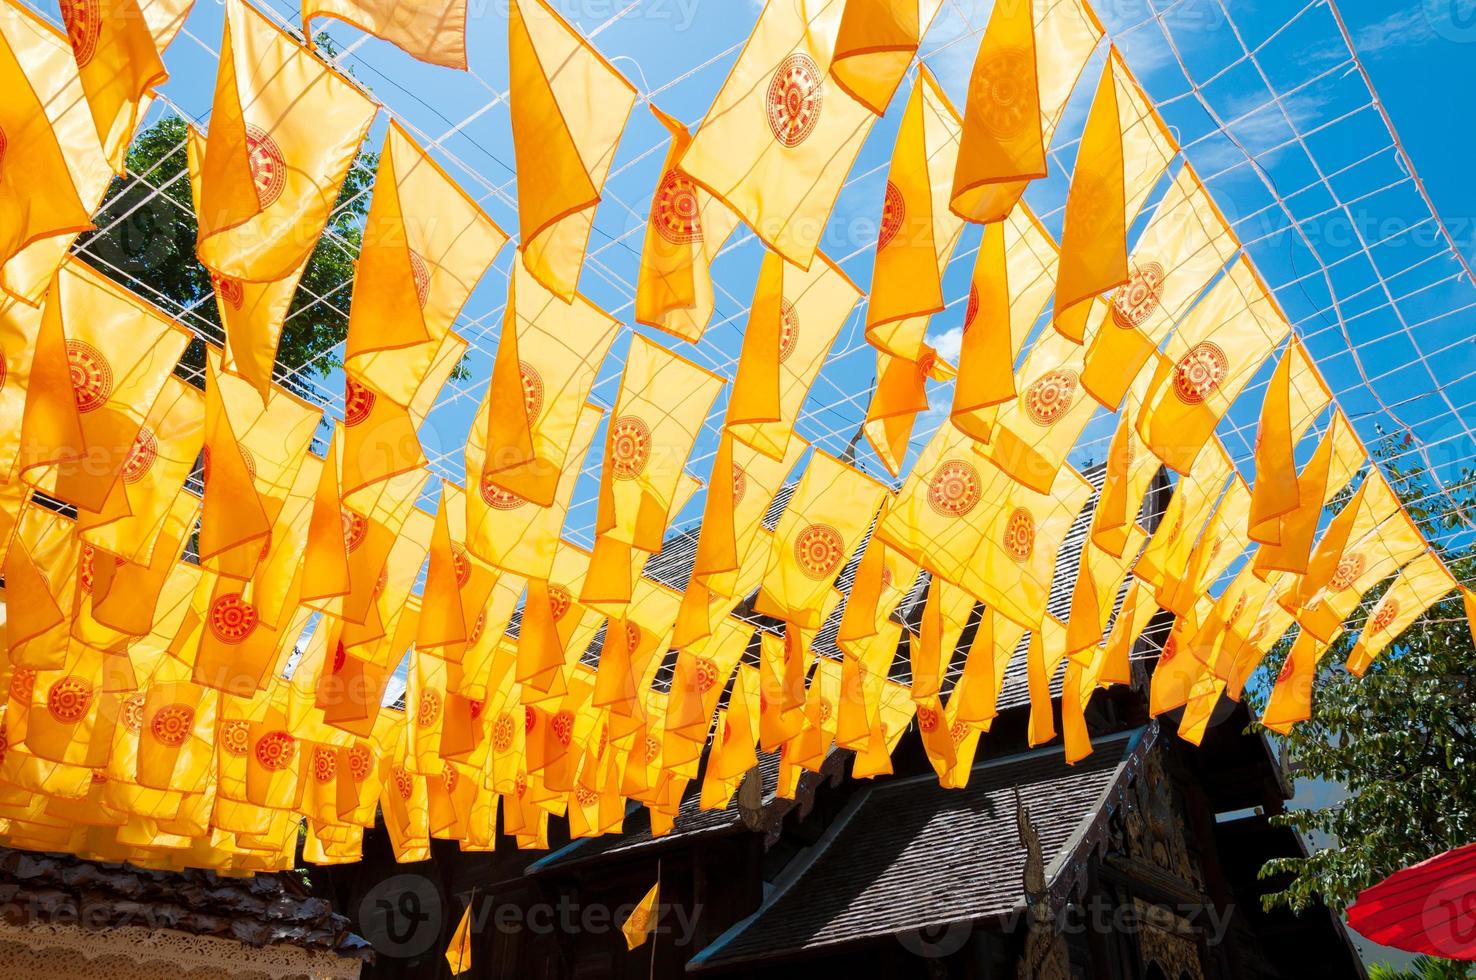 Thammachak flag yellow in temple Wat Phan tao on blue sky temple Northern Thailand photo